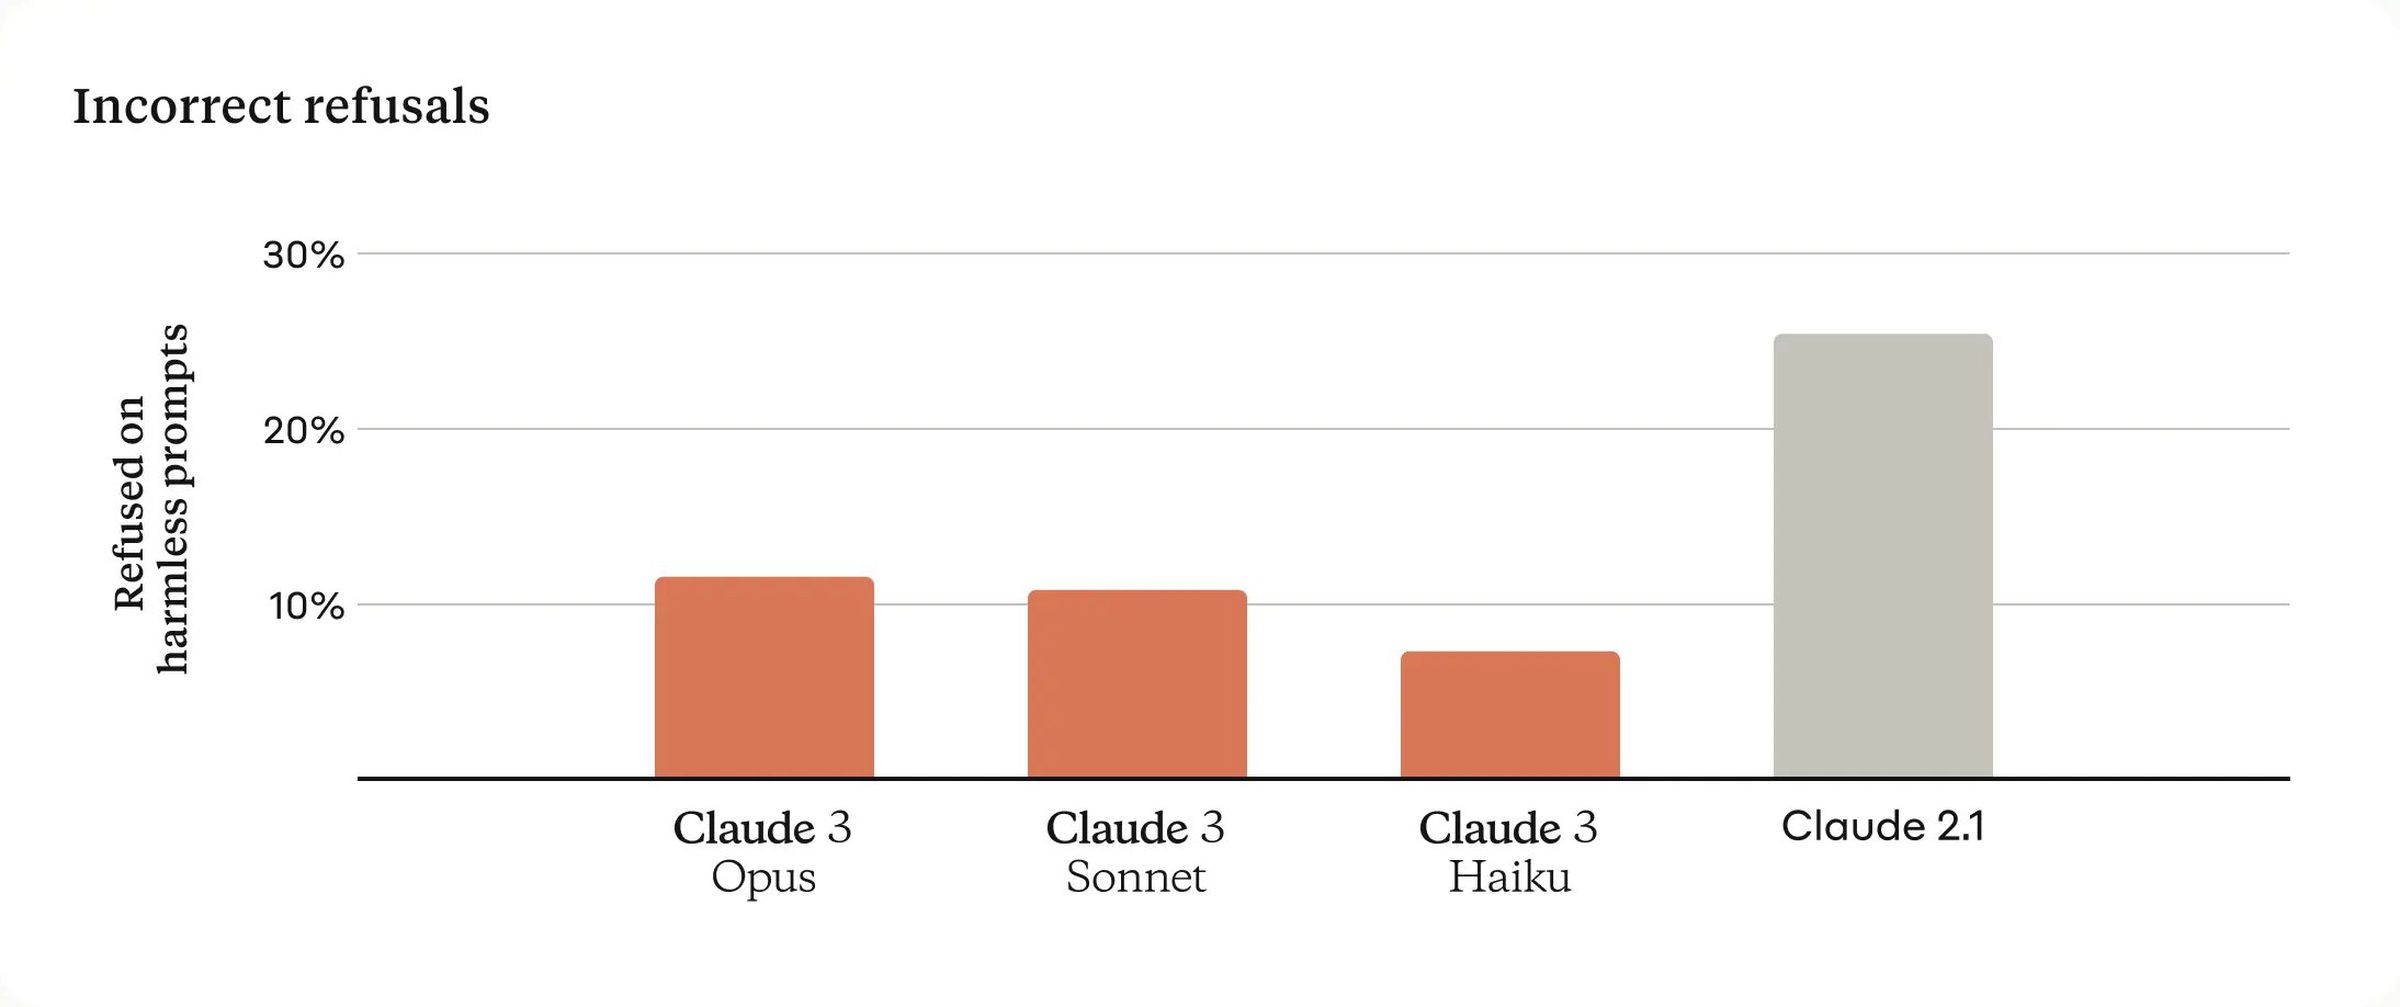 Bar chart showing a significantly lower rate of “refused on harmless prompt” responses by Claude 3 AI models (near or below 10 percent), compared to Claude 2.1 (around 25 percent).